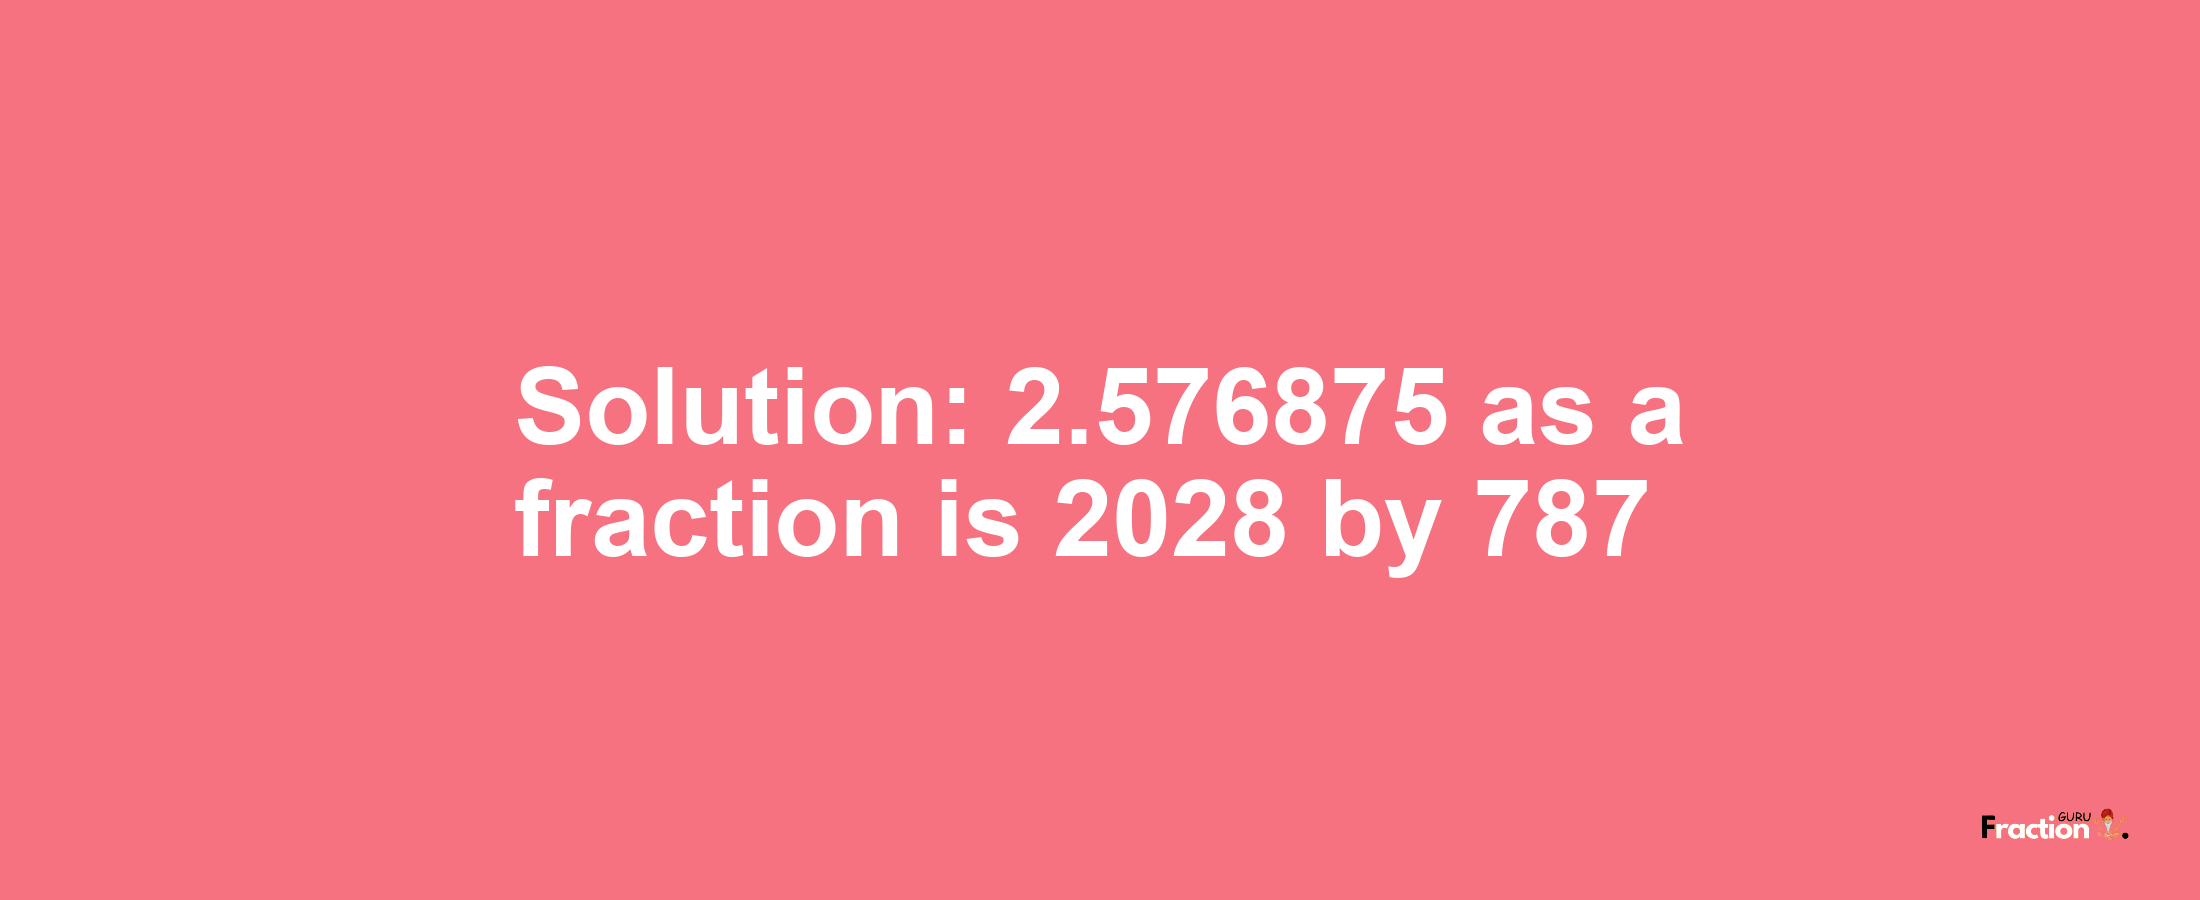 Solution:2.576875 as a fraction is 2028/787